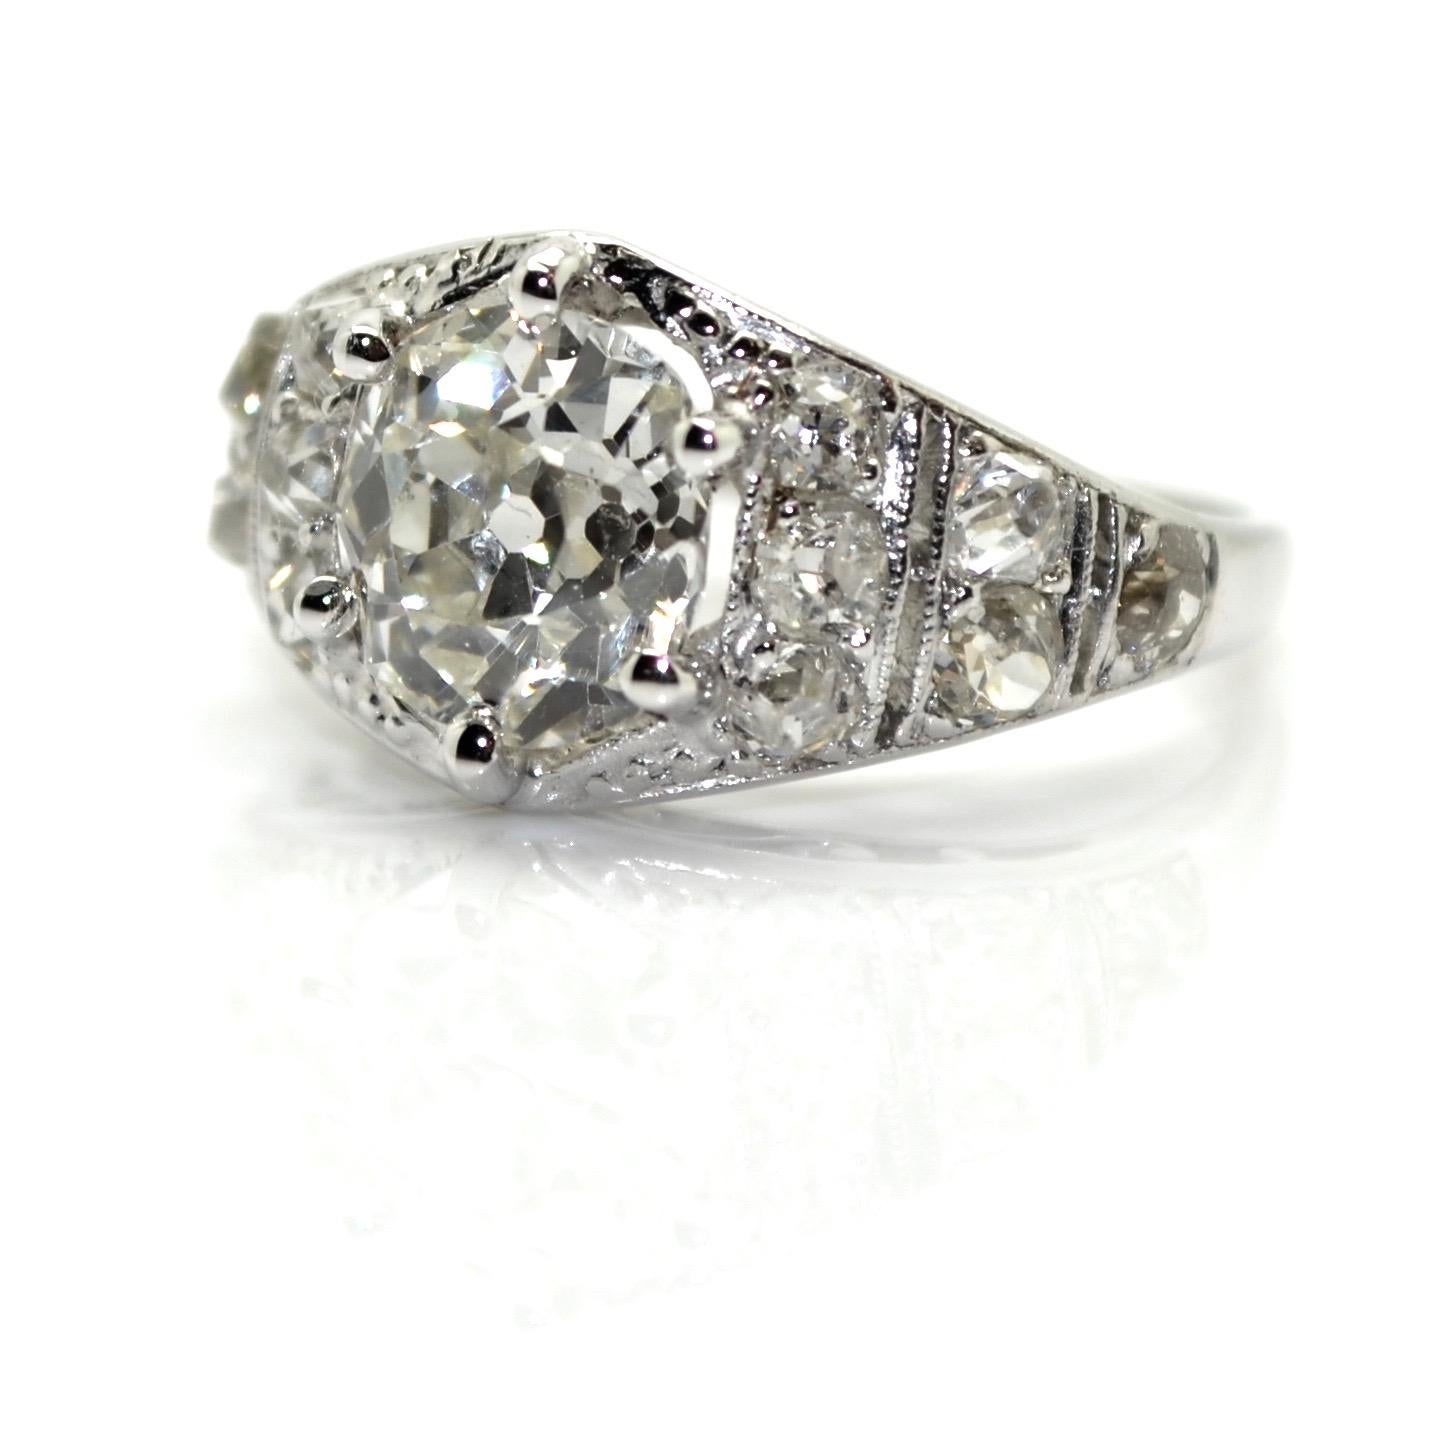 French Art-Deco platinum ring set with an old European cushion cut diamonds and graduating stepped shoulders, circa 1920.
The central diamond is weighting approximatively 2.10 carat (estimated H-I color and SI clarity). The total approximate diamond